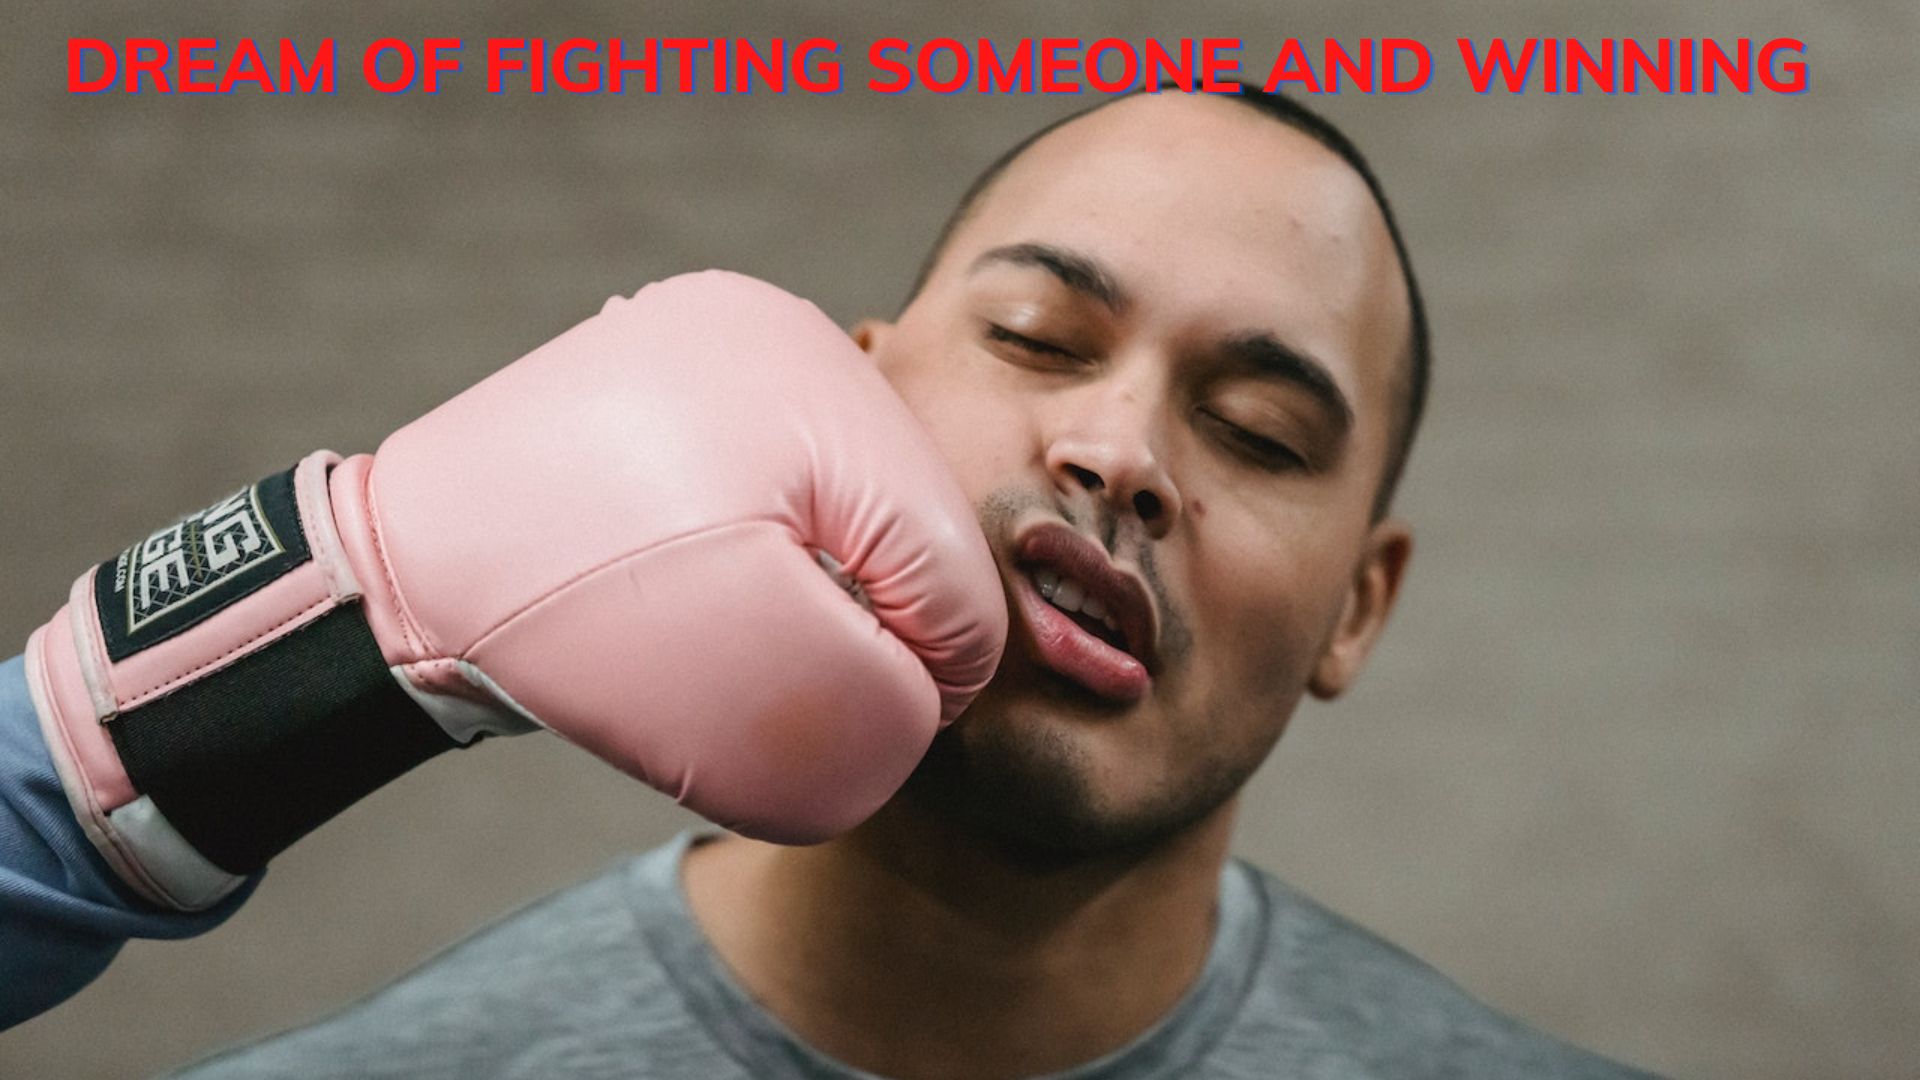 Dream Of Fighting Someone And Winning - It Signifies Overcoming Challenges